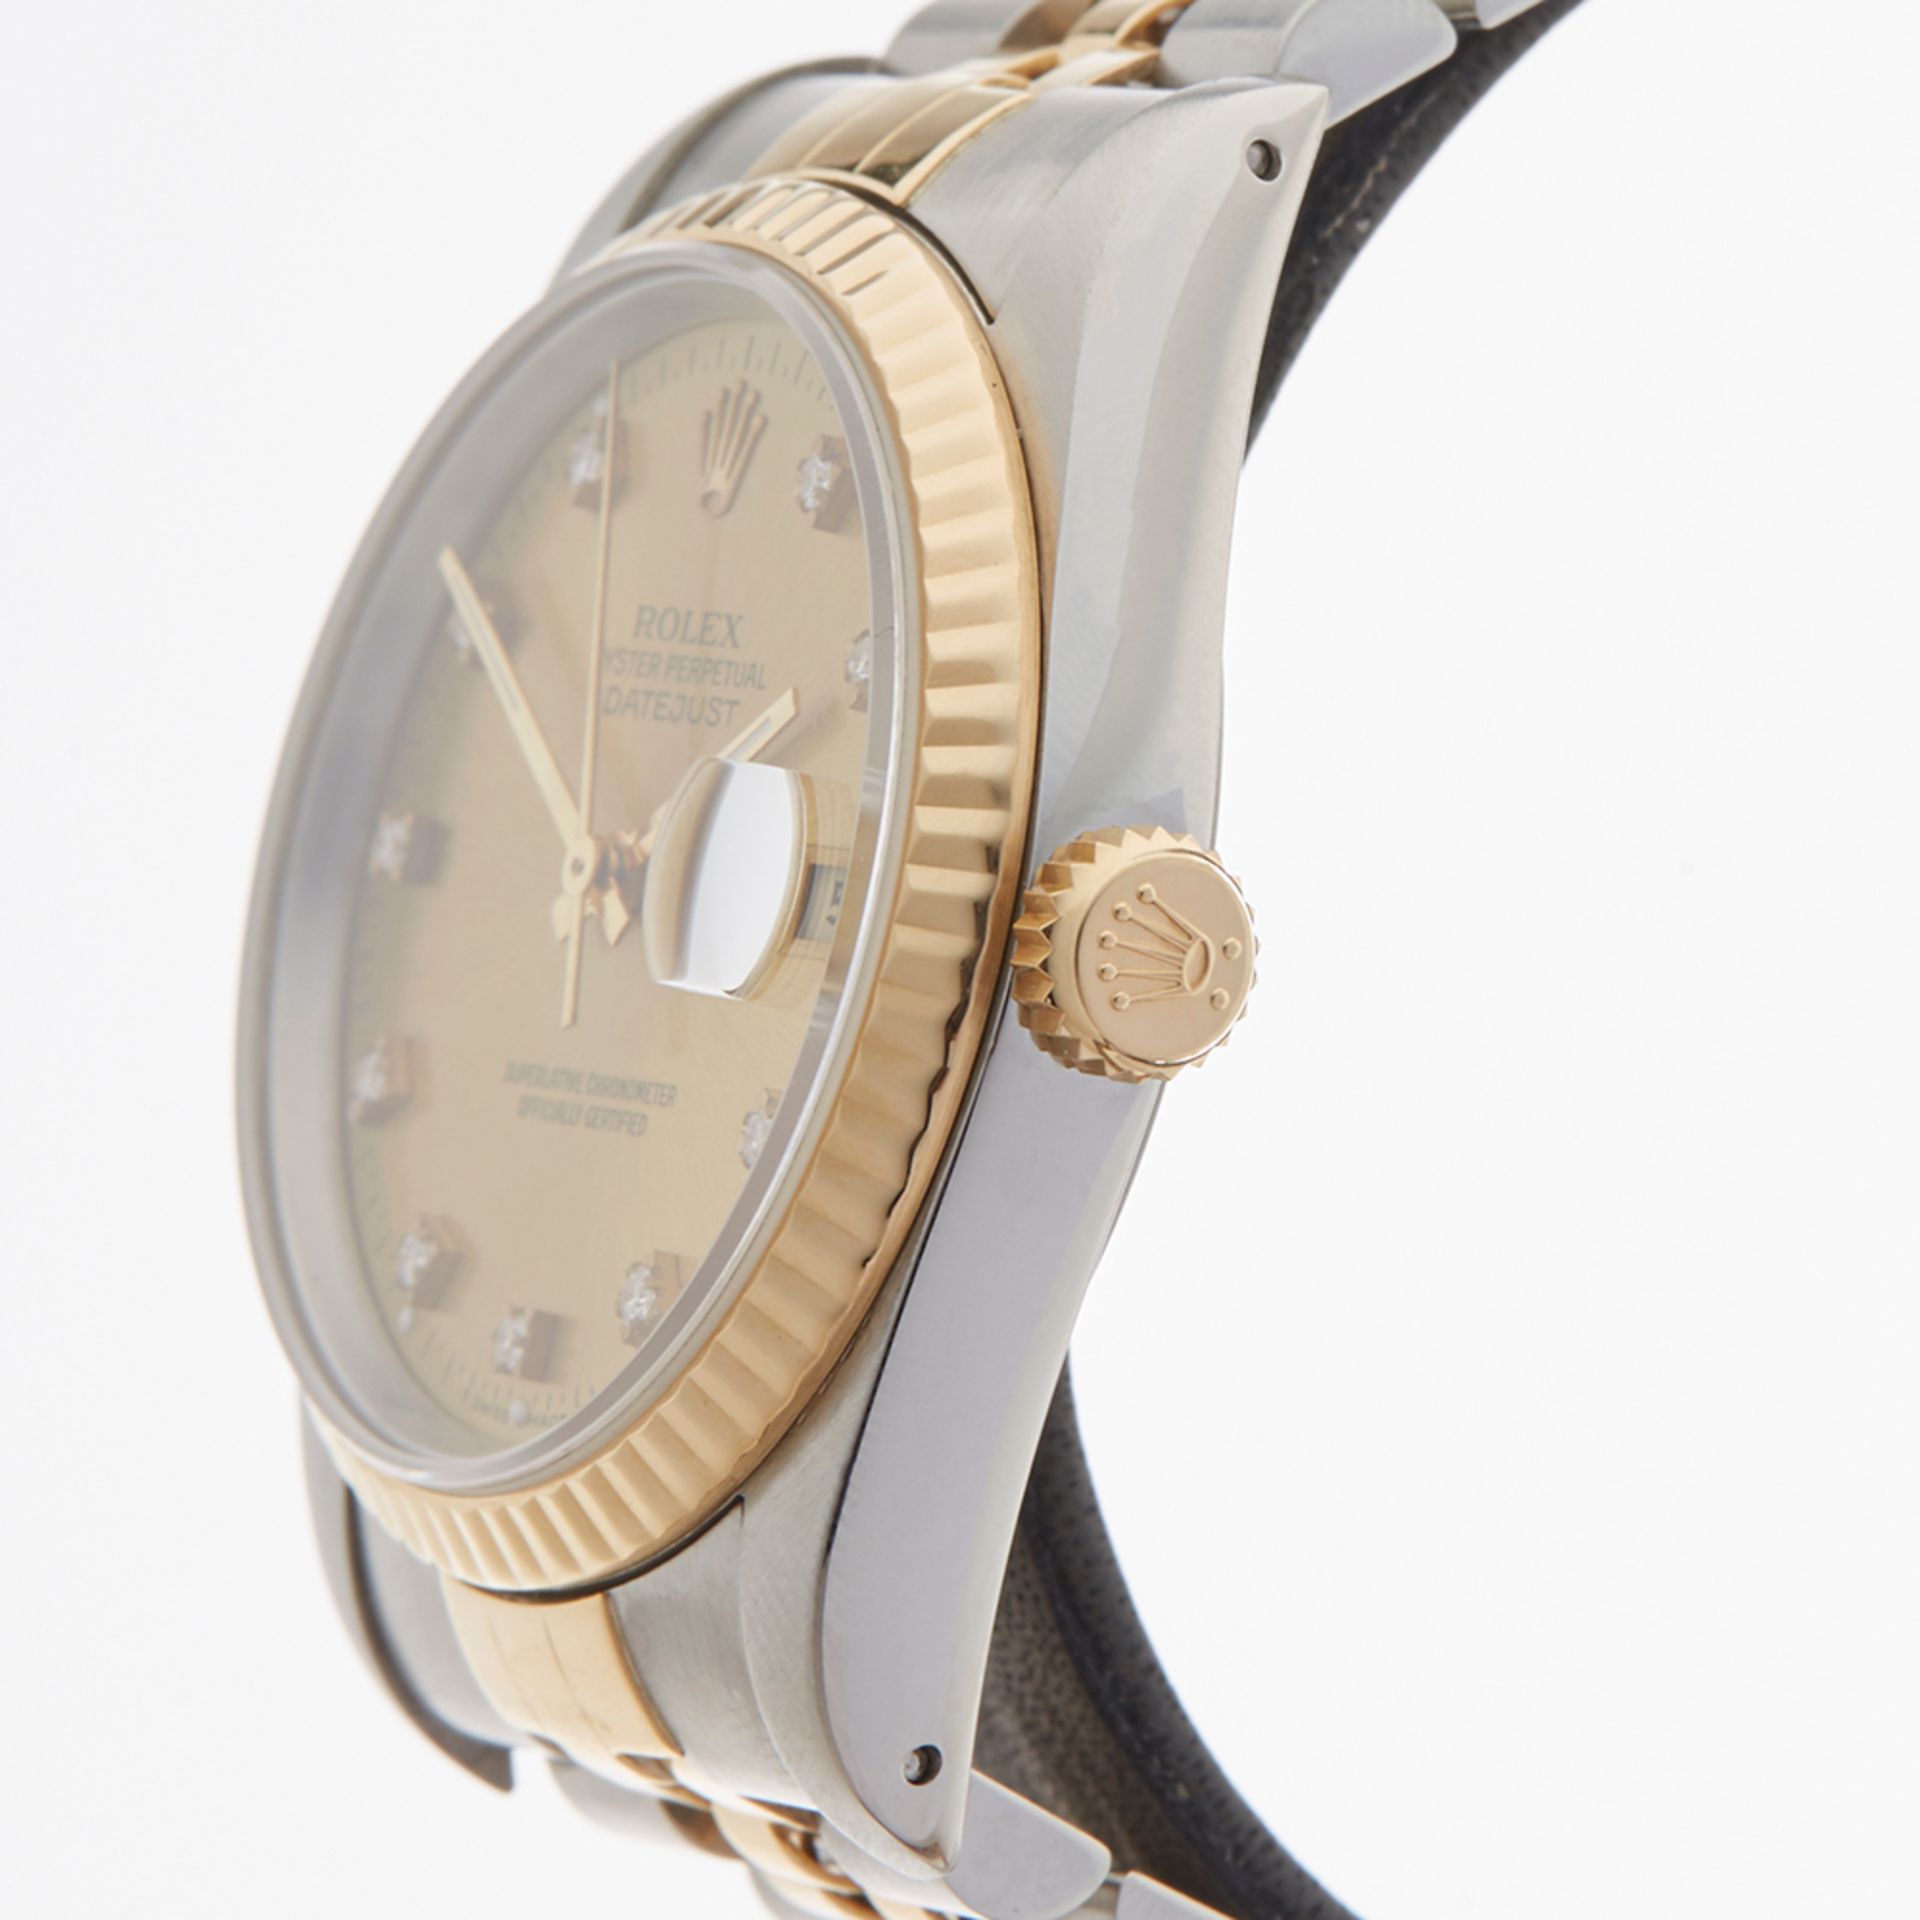 Datejust 36mm Stainless Steel & 18k Yellow Gold - 16233 - Image 4 of 9